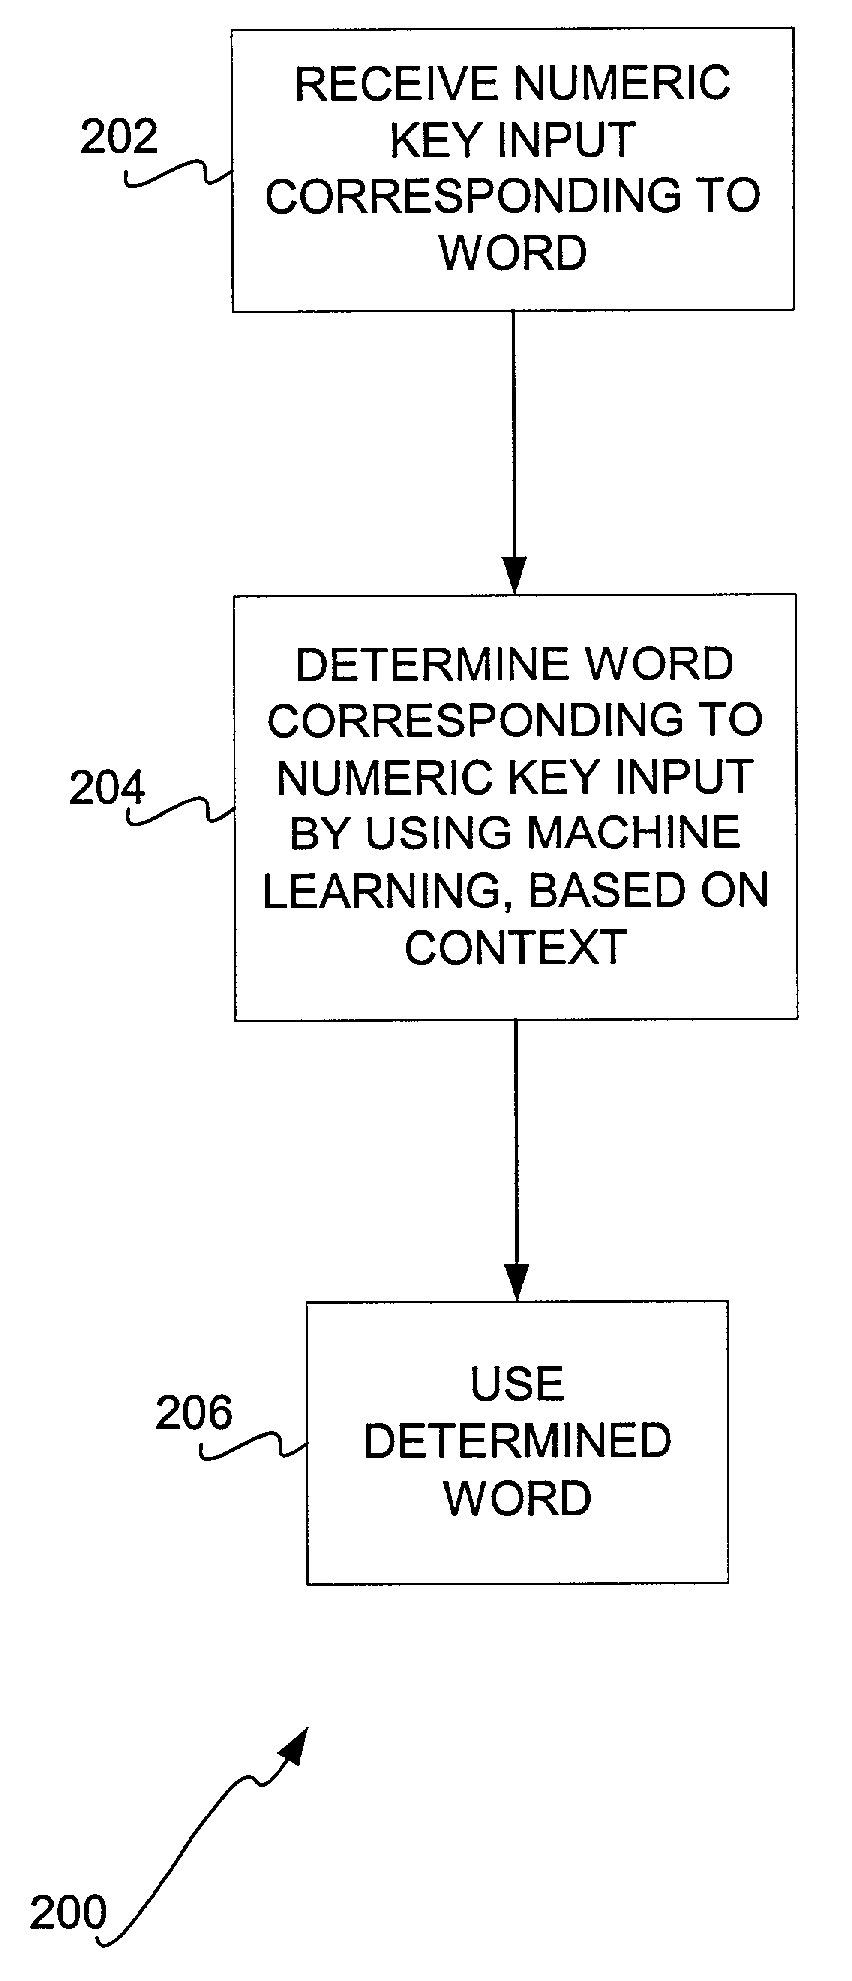 Machine learning contextual approach to word determination for text input via reduced keypad keys